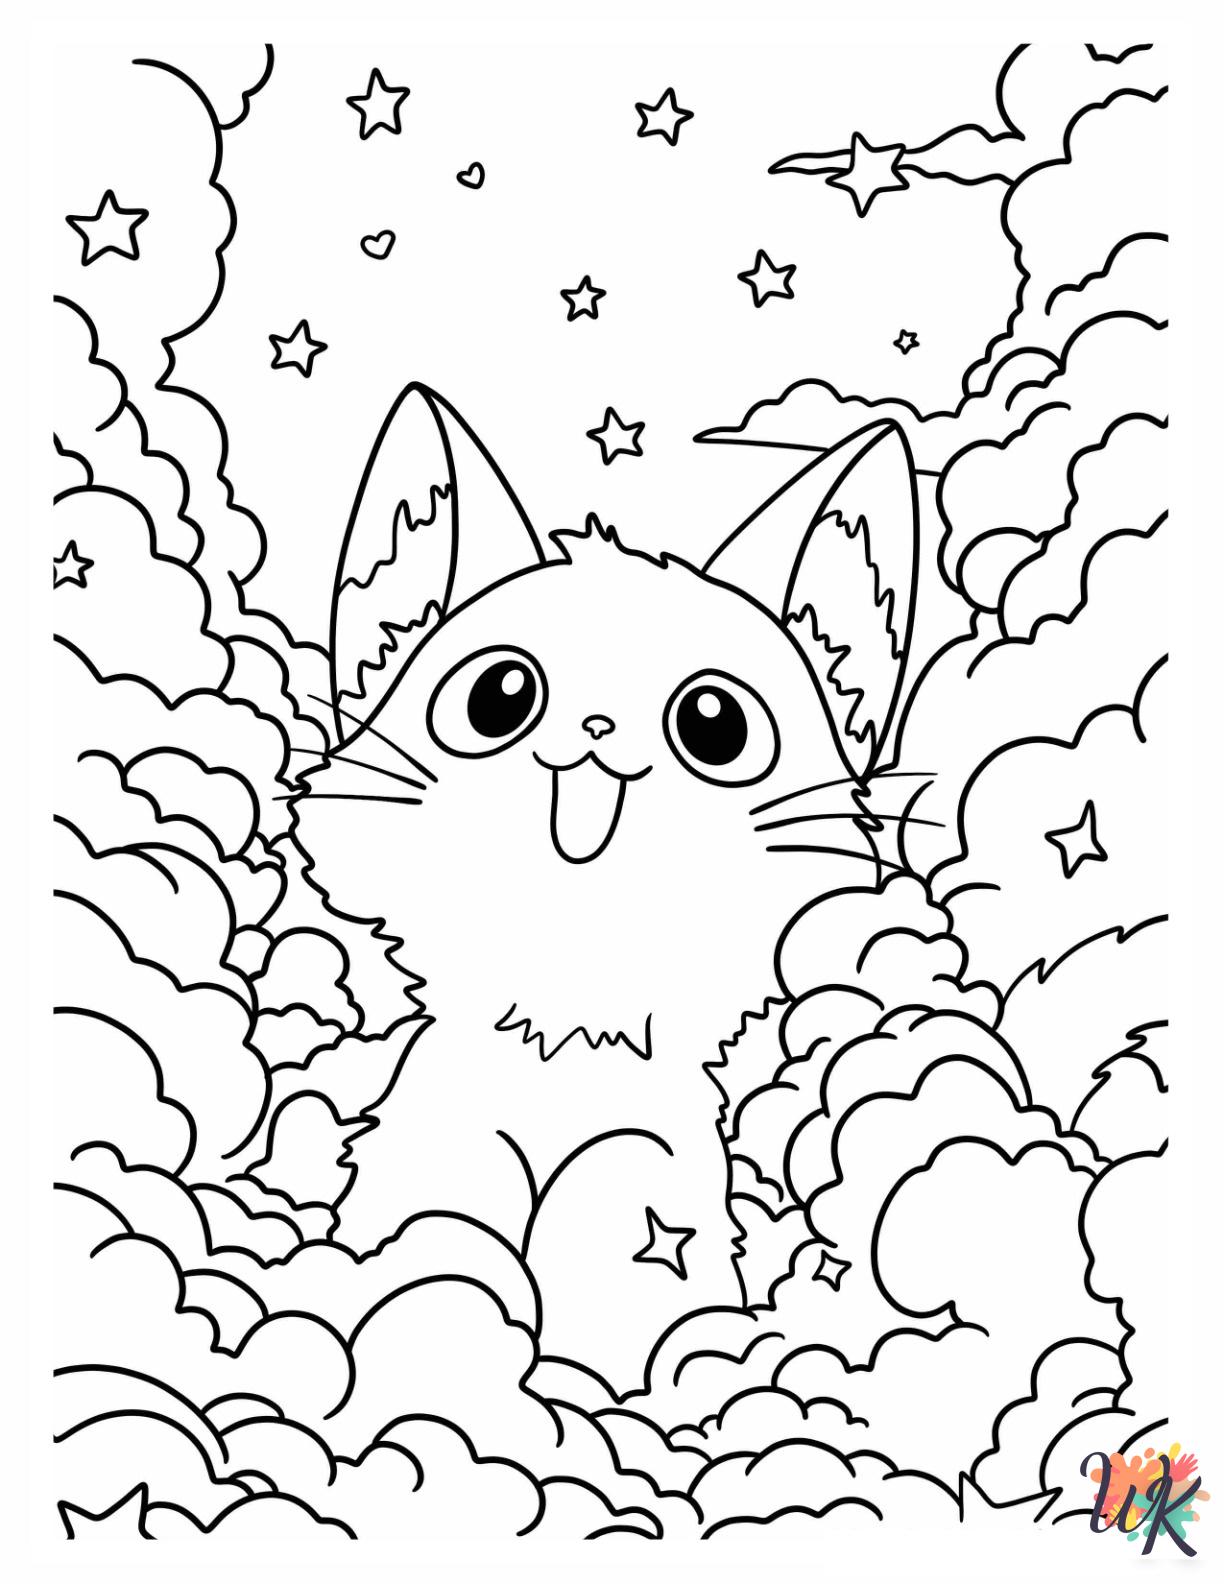 Aesthetic coloring pages free